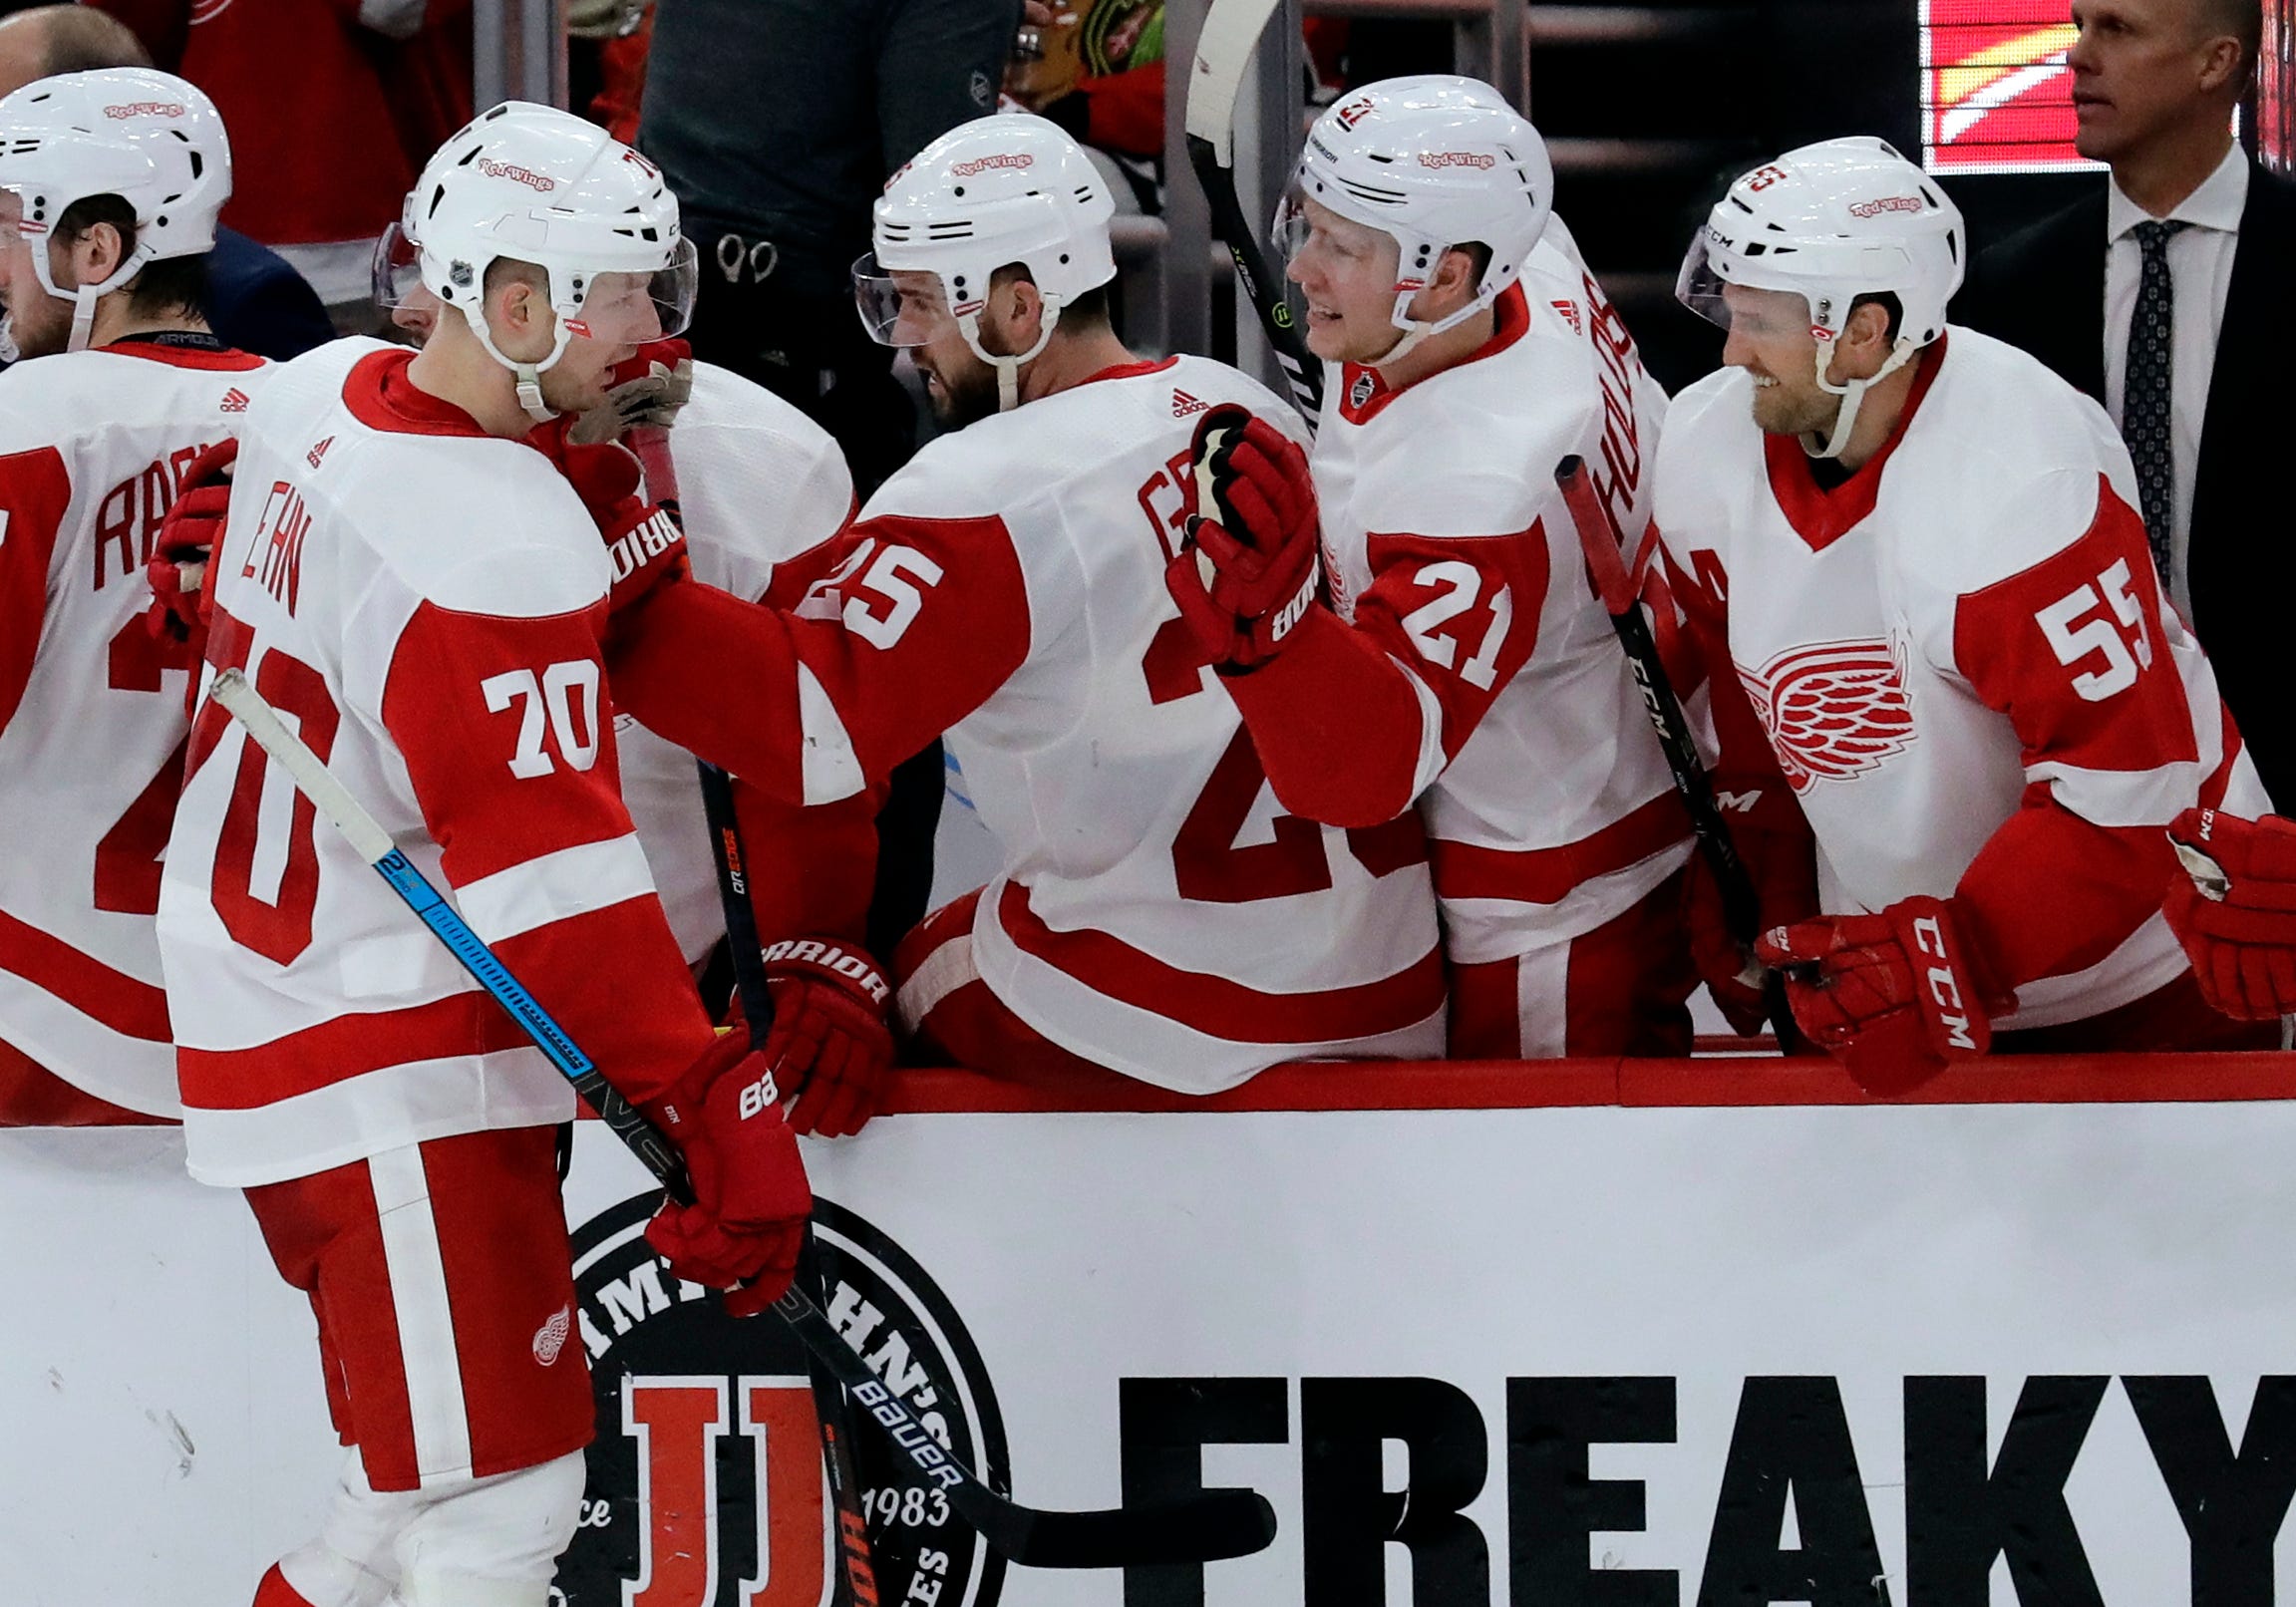 Detroit Red Wings center Christoffer Ehn (70) celebrates with teammates after scoring a goal against the Chicago Blackhawks during the second period.